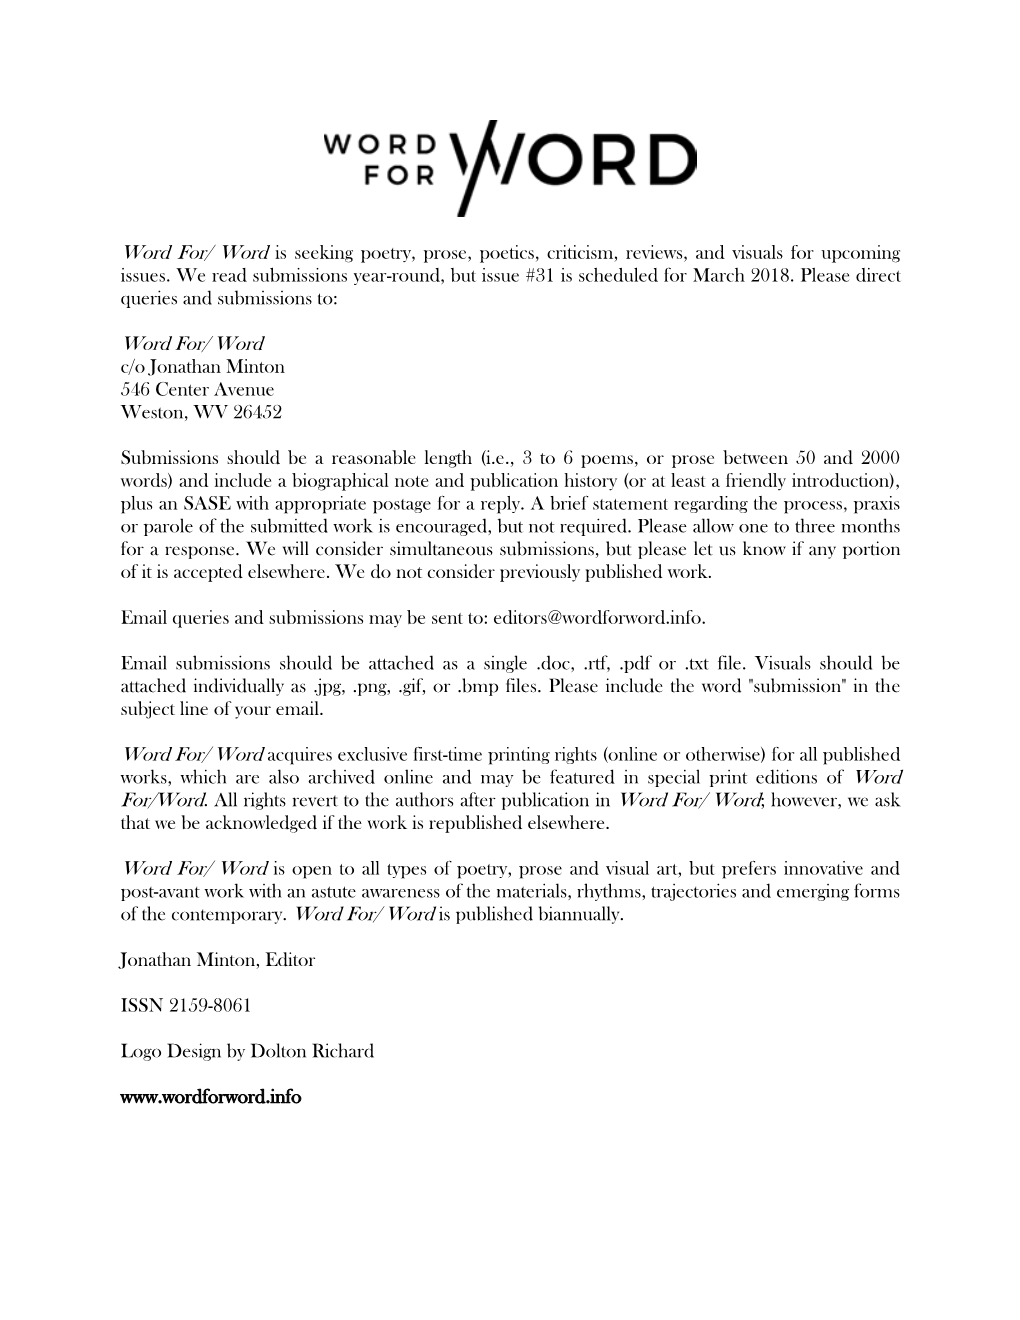 Word Is Seeking Poetry, Prose, Poetics, Criticism, Reviews, and Visuals for Upcoming Issues